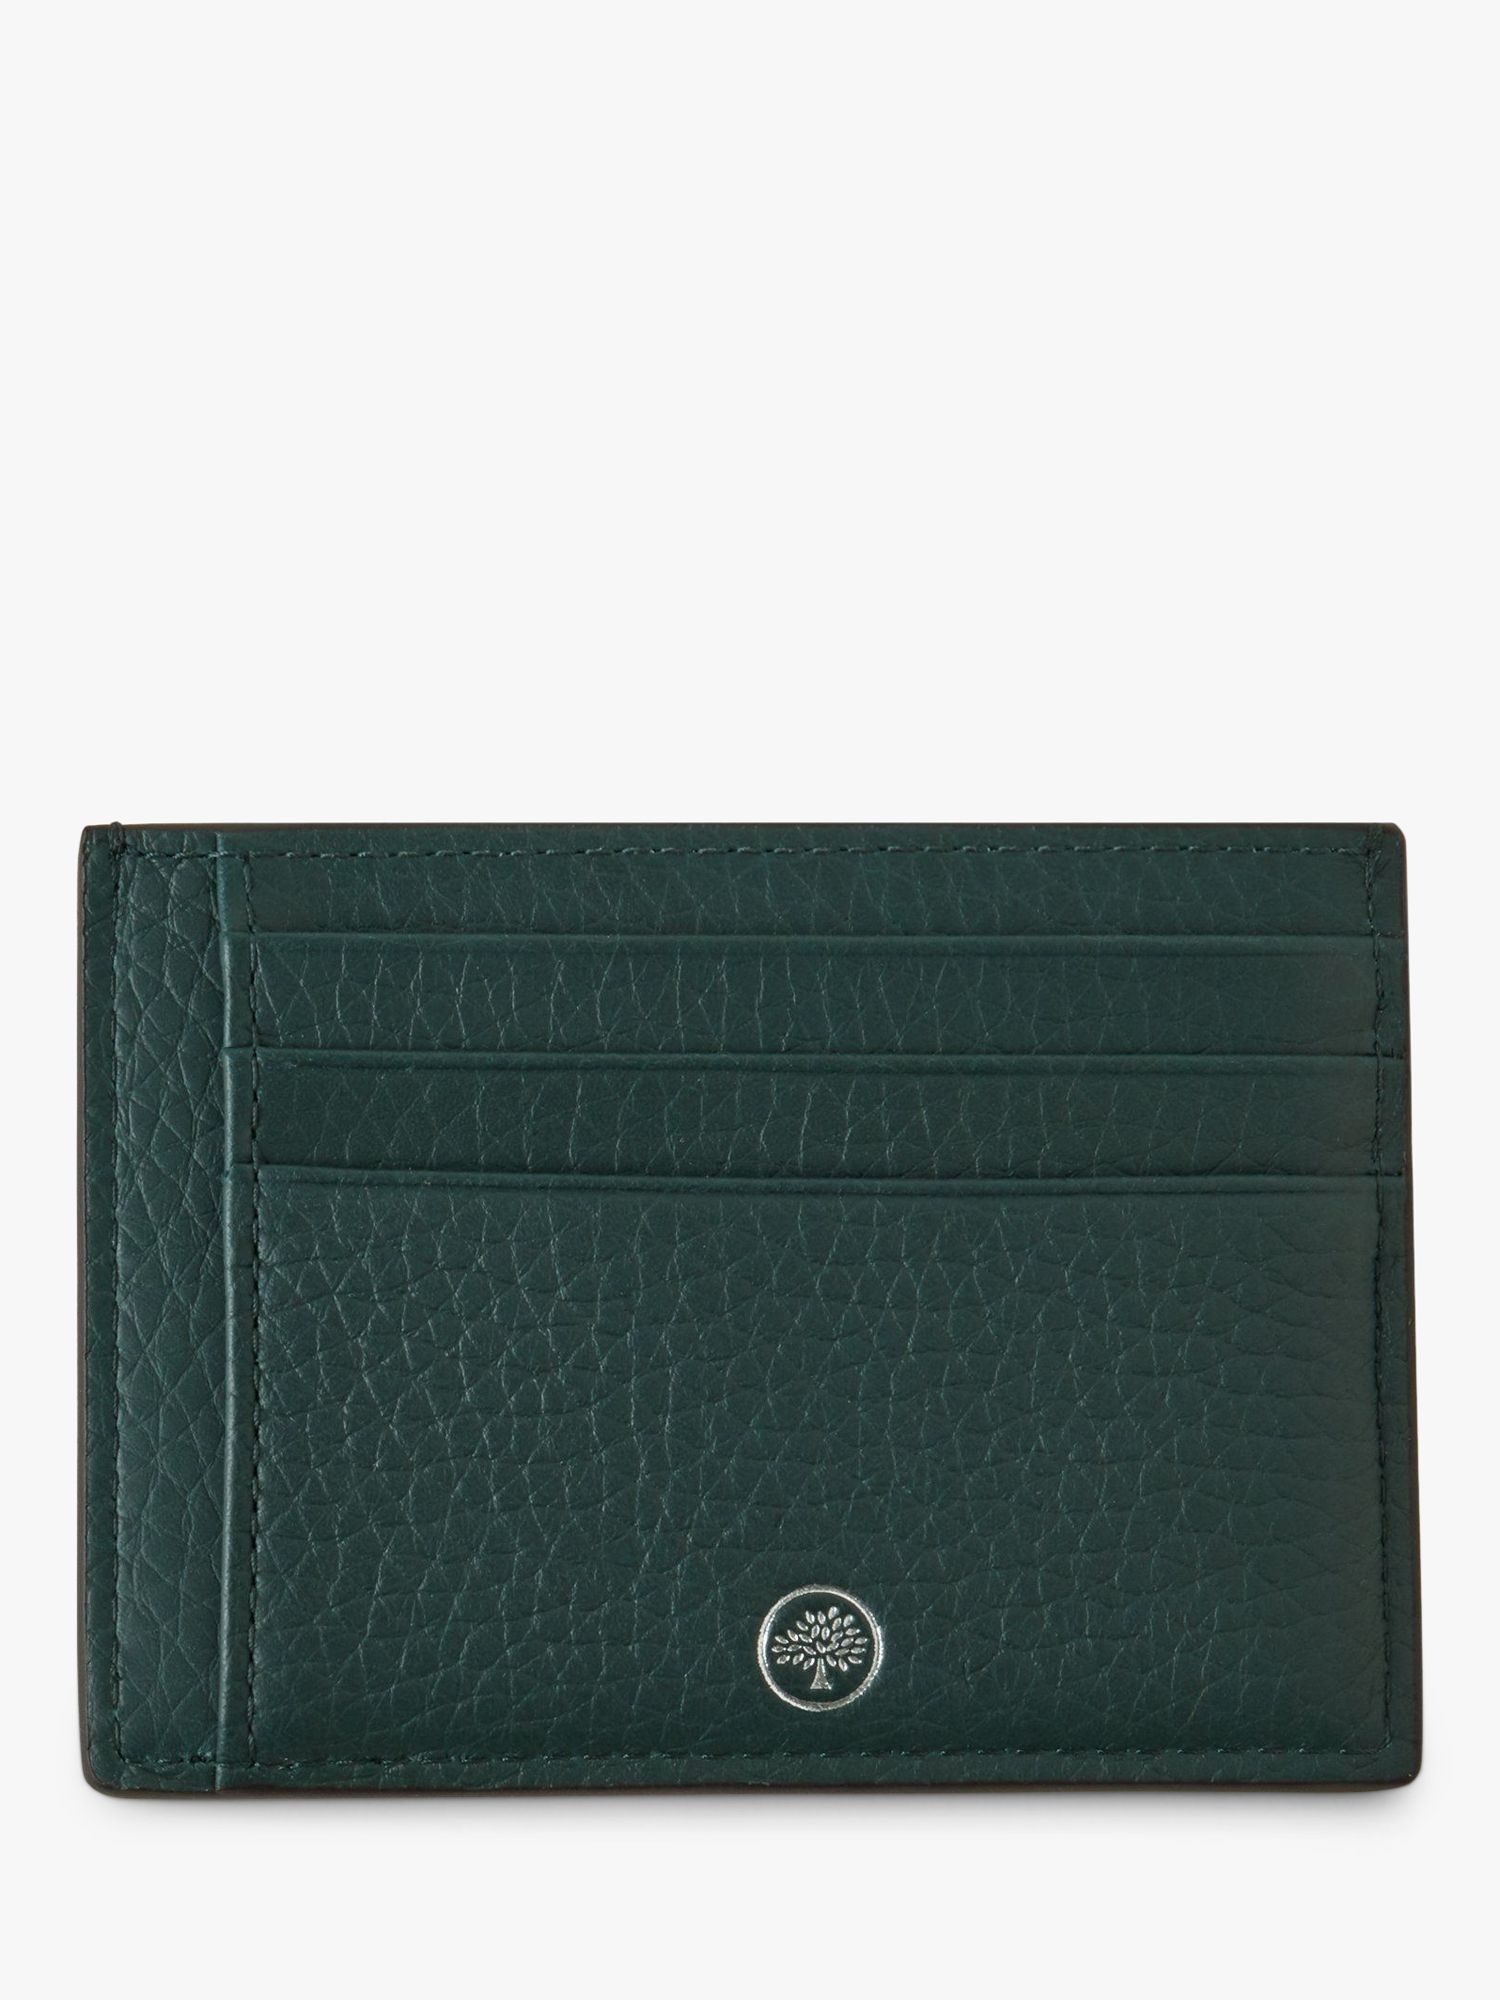 Mulberry Heavy Grain Leather Card Holder, Mulberry Green at John Lewis & Partners